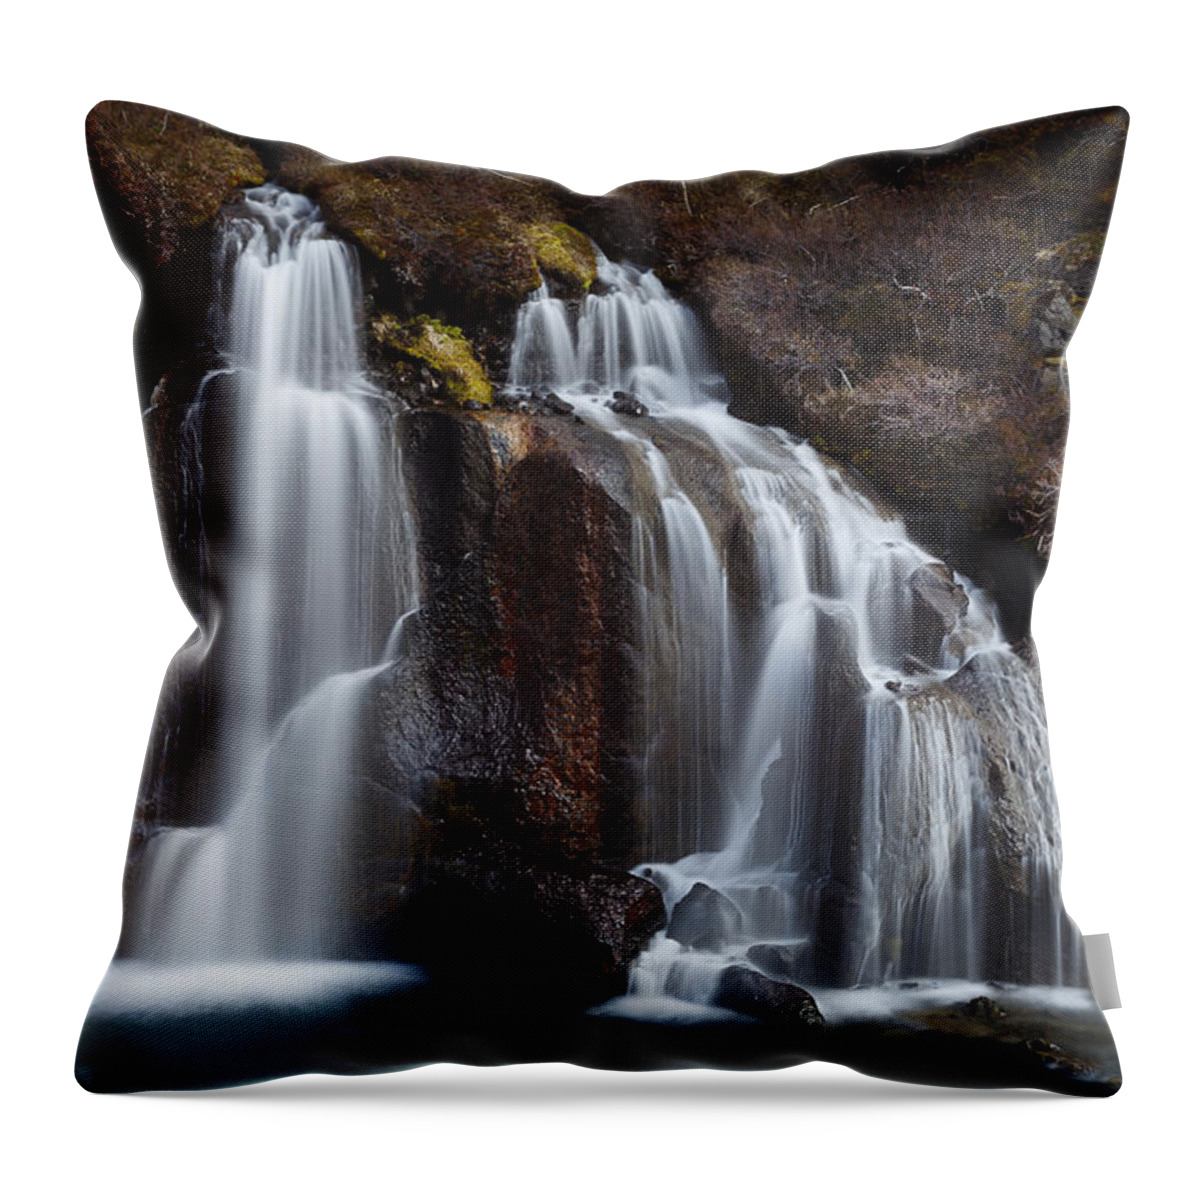 Iceland Throw Pillow featuring the photograph The Descent by Dominique Dubied